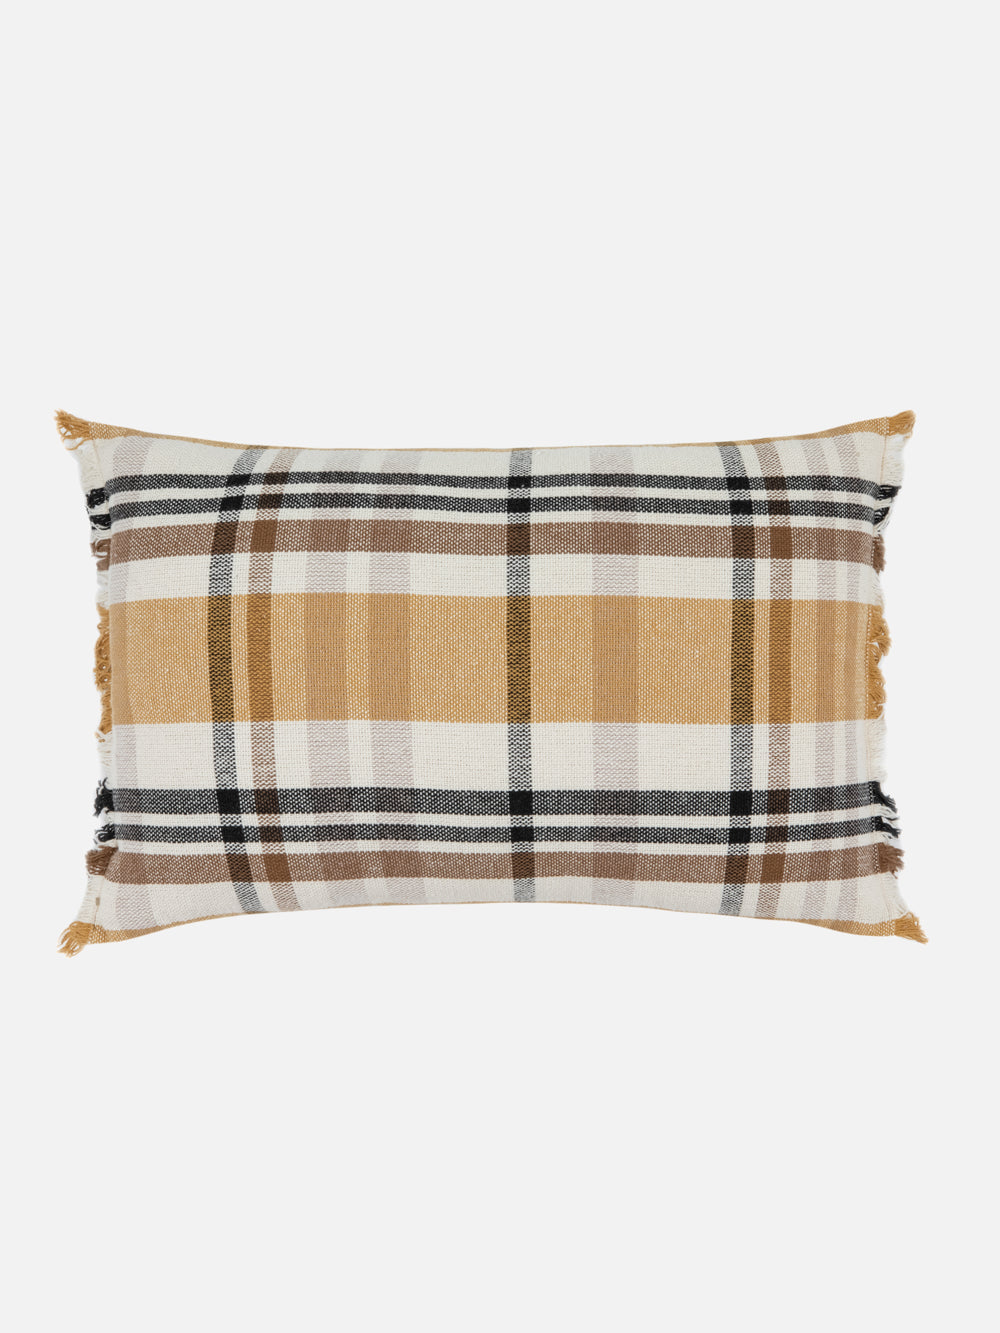 Country Throw Pillow